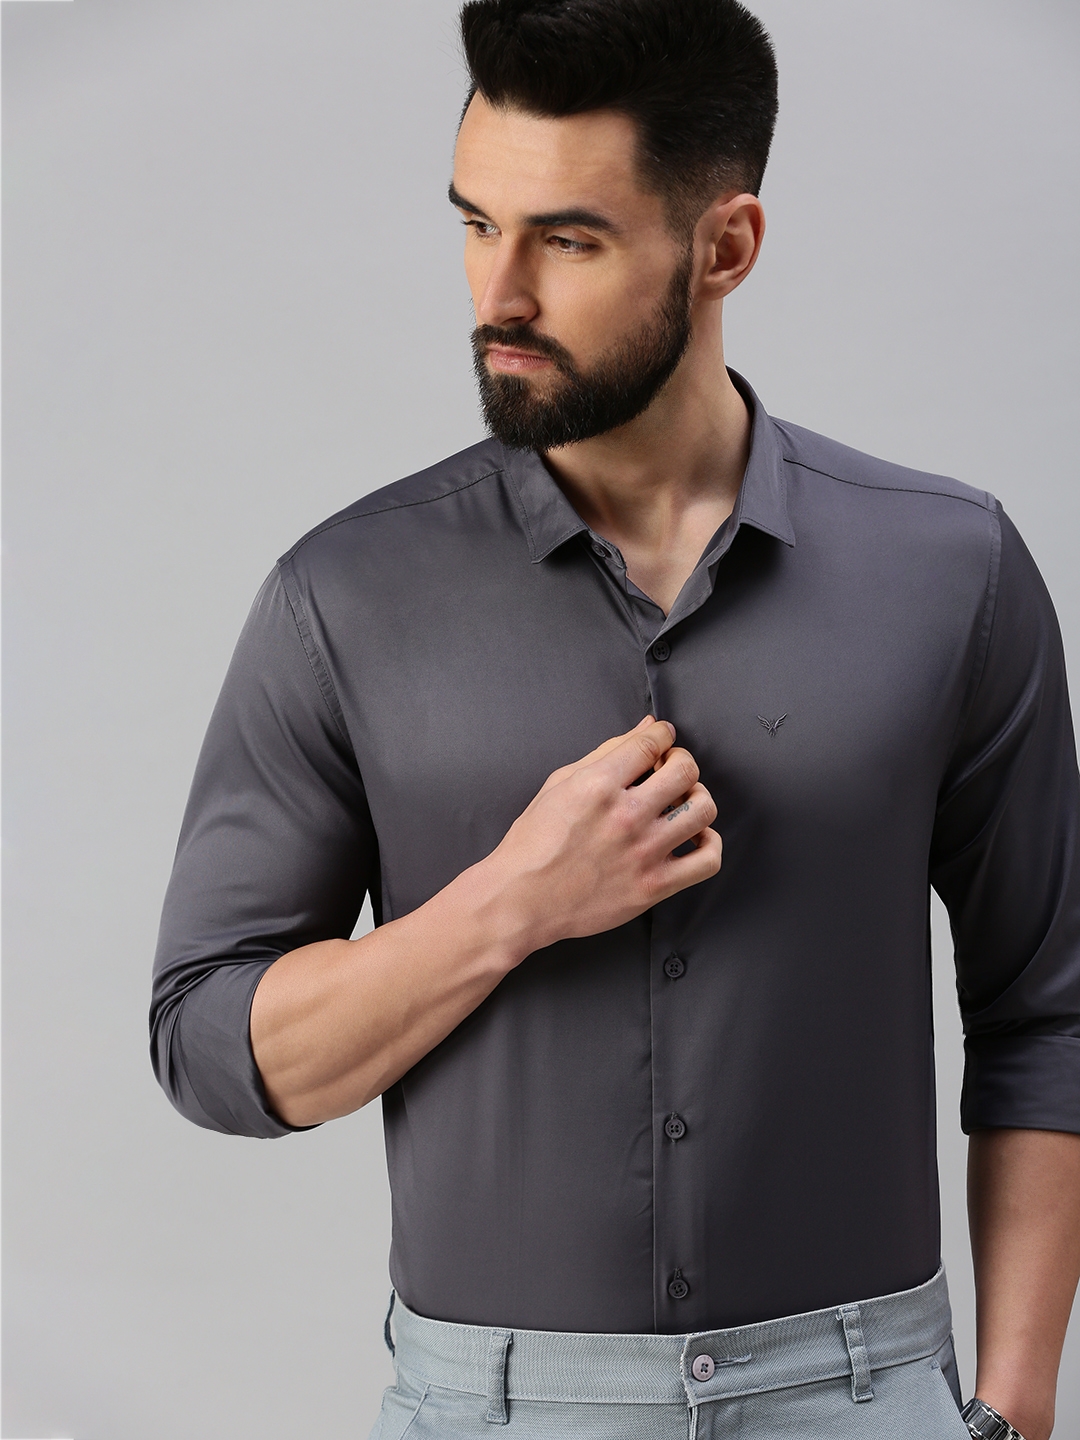 Showoff | SHOWOFF Men's Roll-Up Sleeves Charcoal Solid Shirts